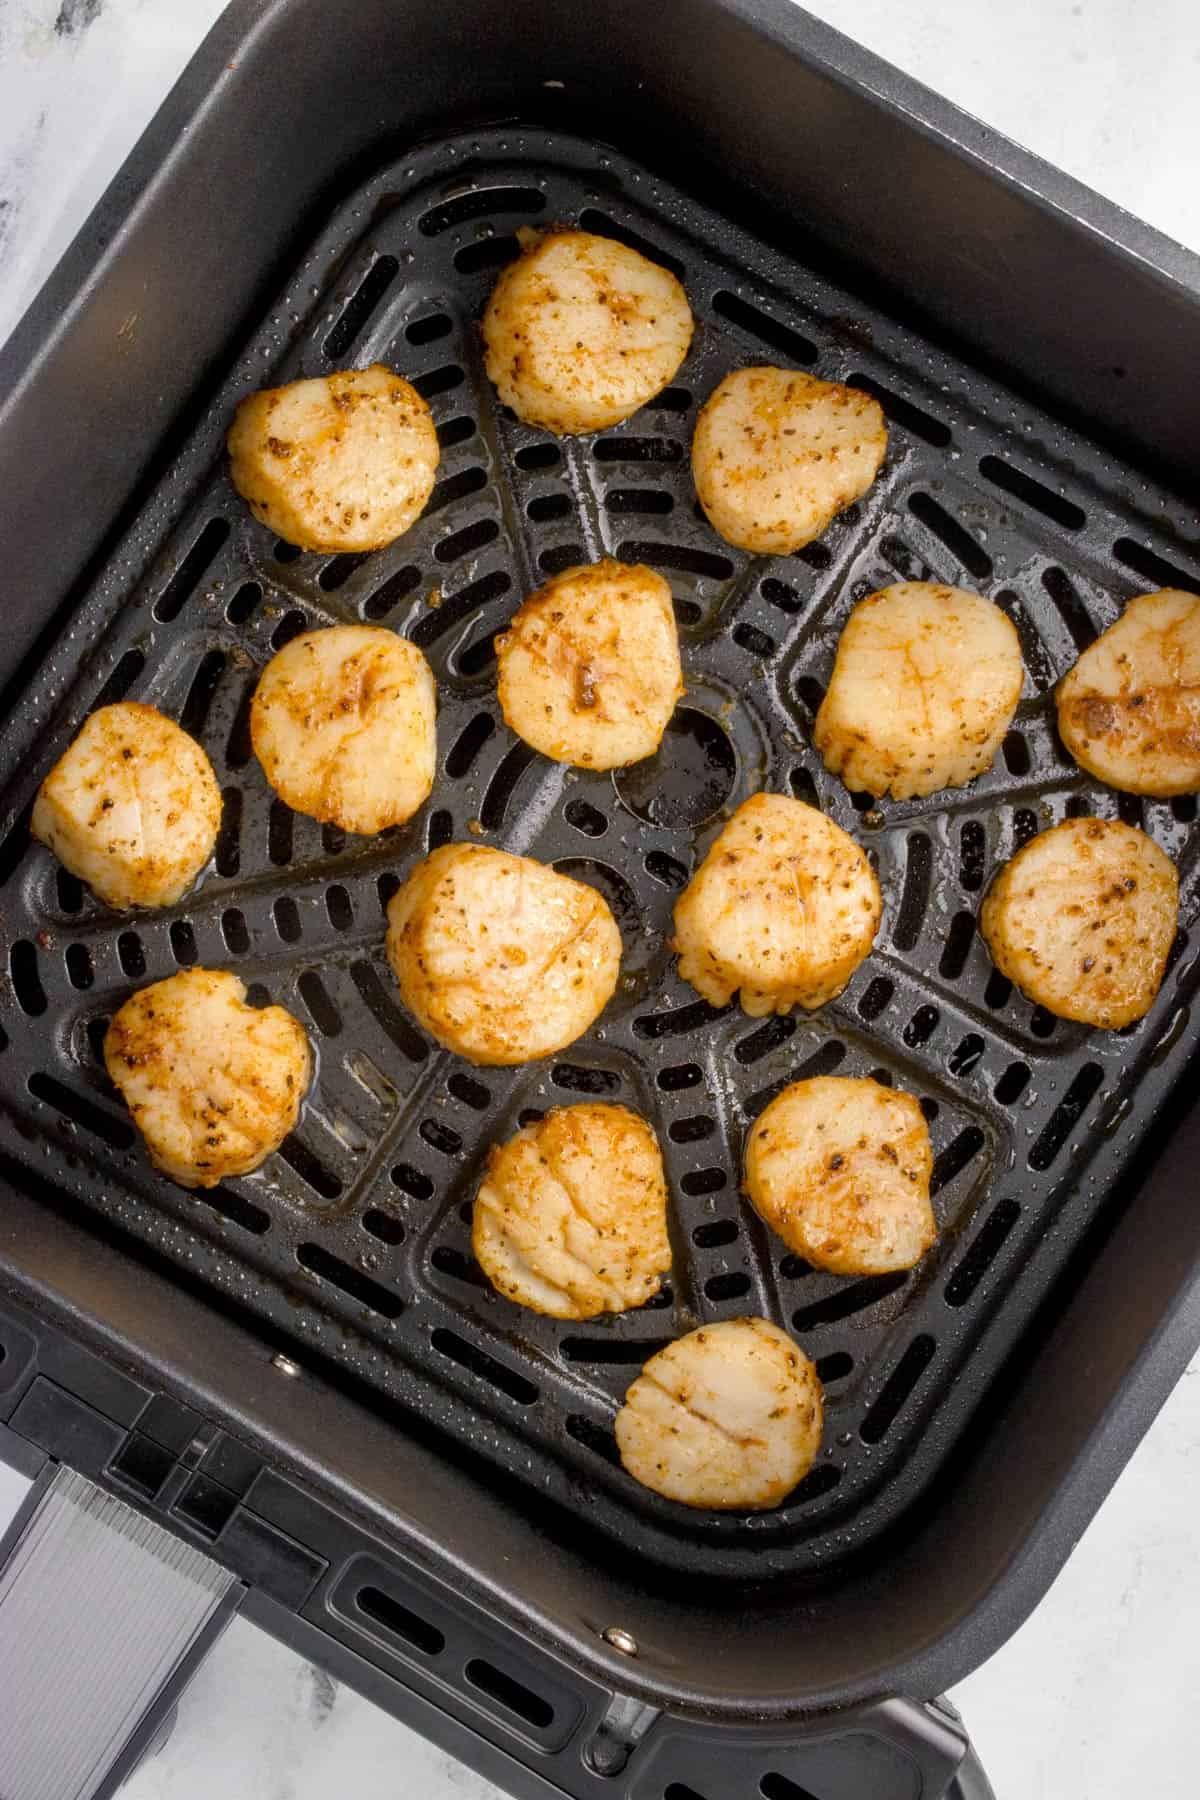 Some scallops in an air fryer.